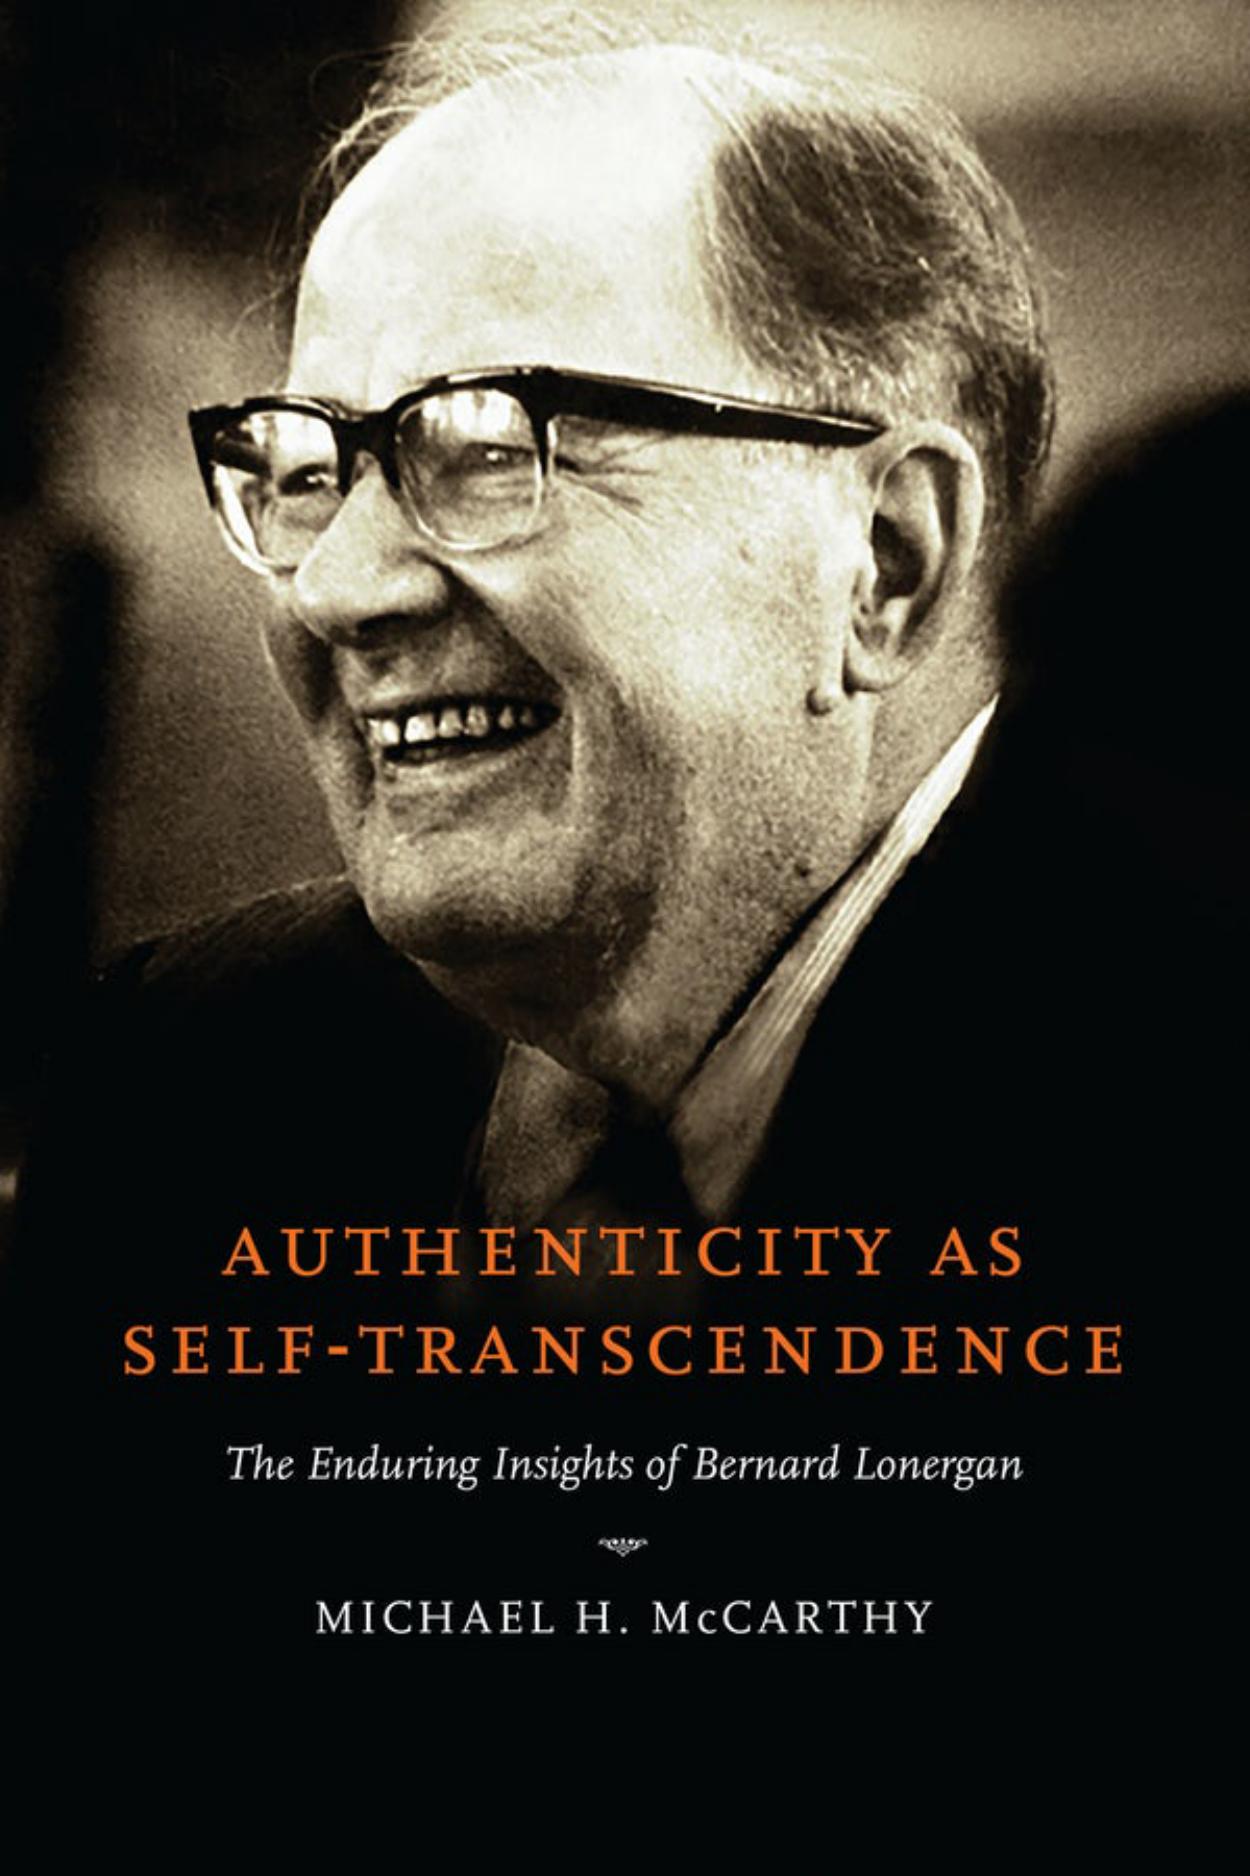 Authenticity as Self-Transcendence: The Enduring Insights of Bernard Lonergan by Michael H. McCarthy